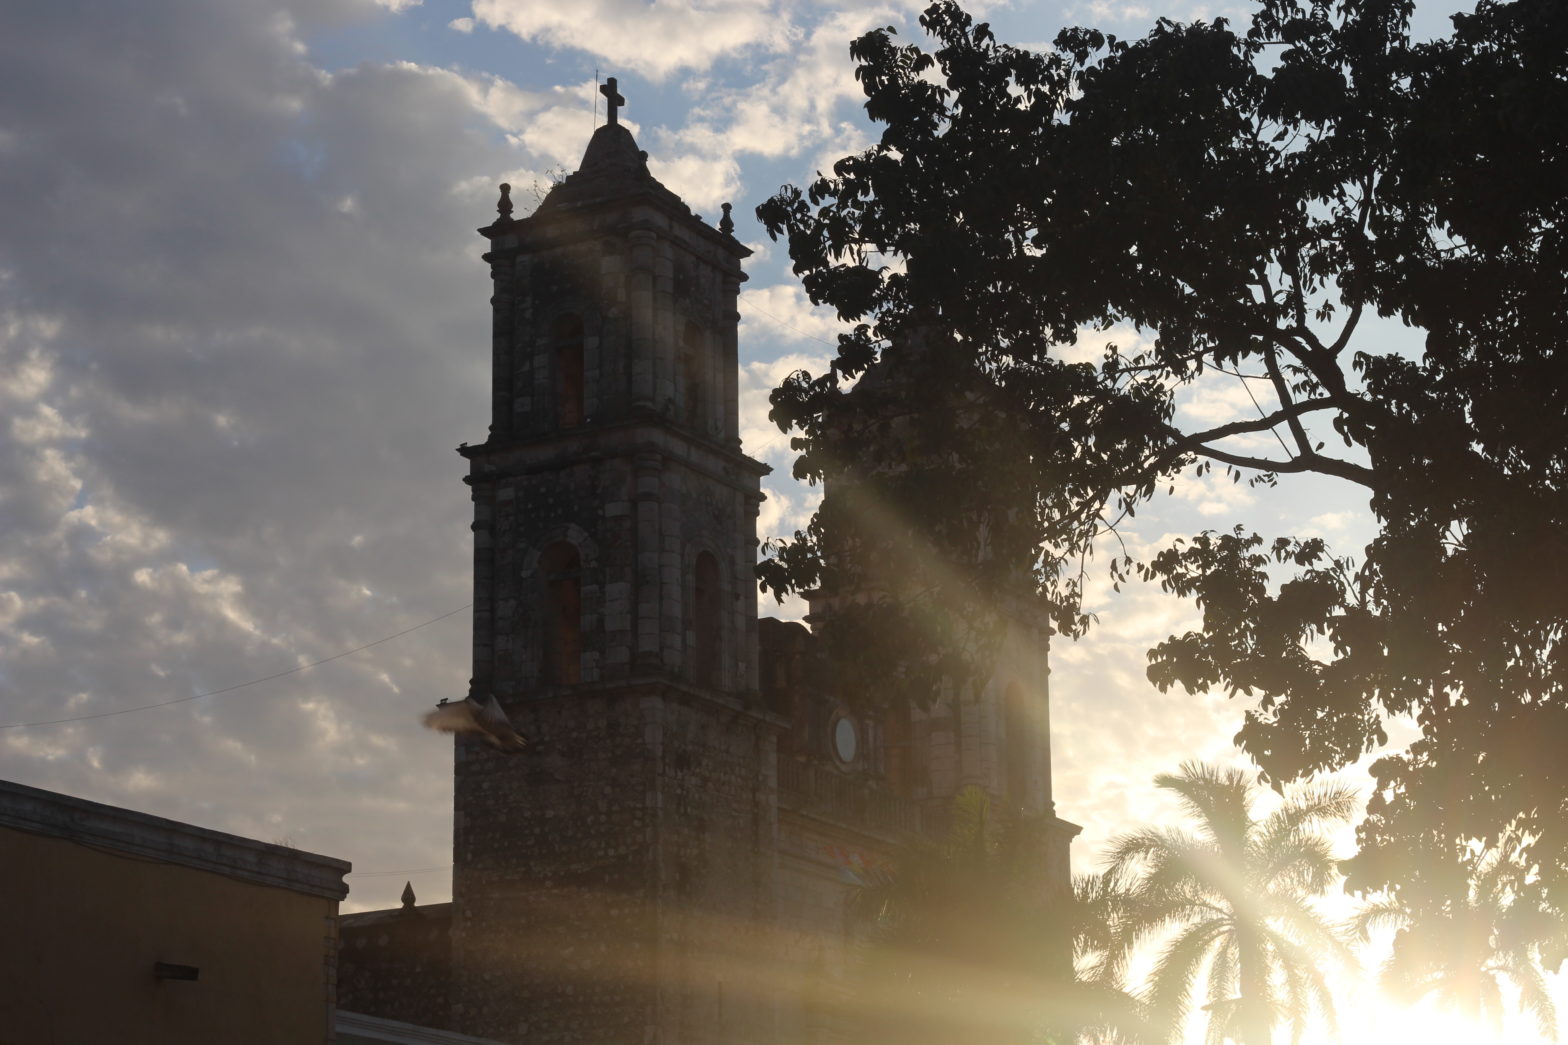 Is Valladolid Worth A Visit? Here Are The Best Spots In This Less Traveled Yucatán Town